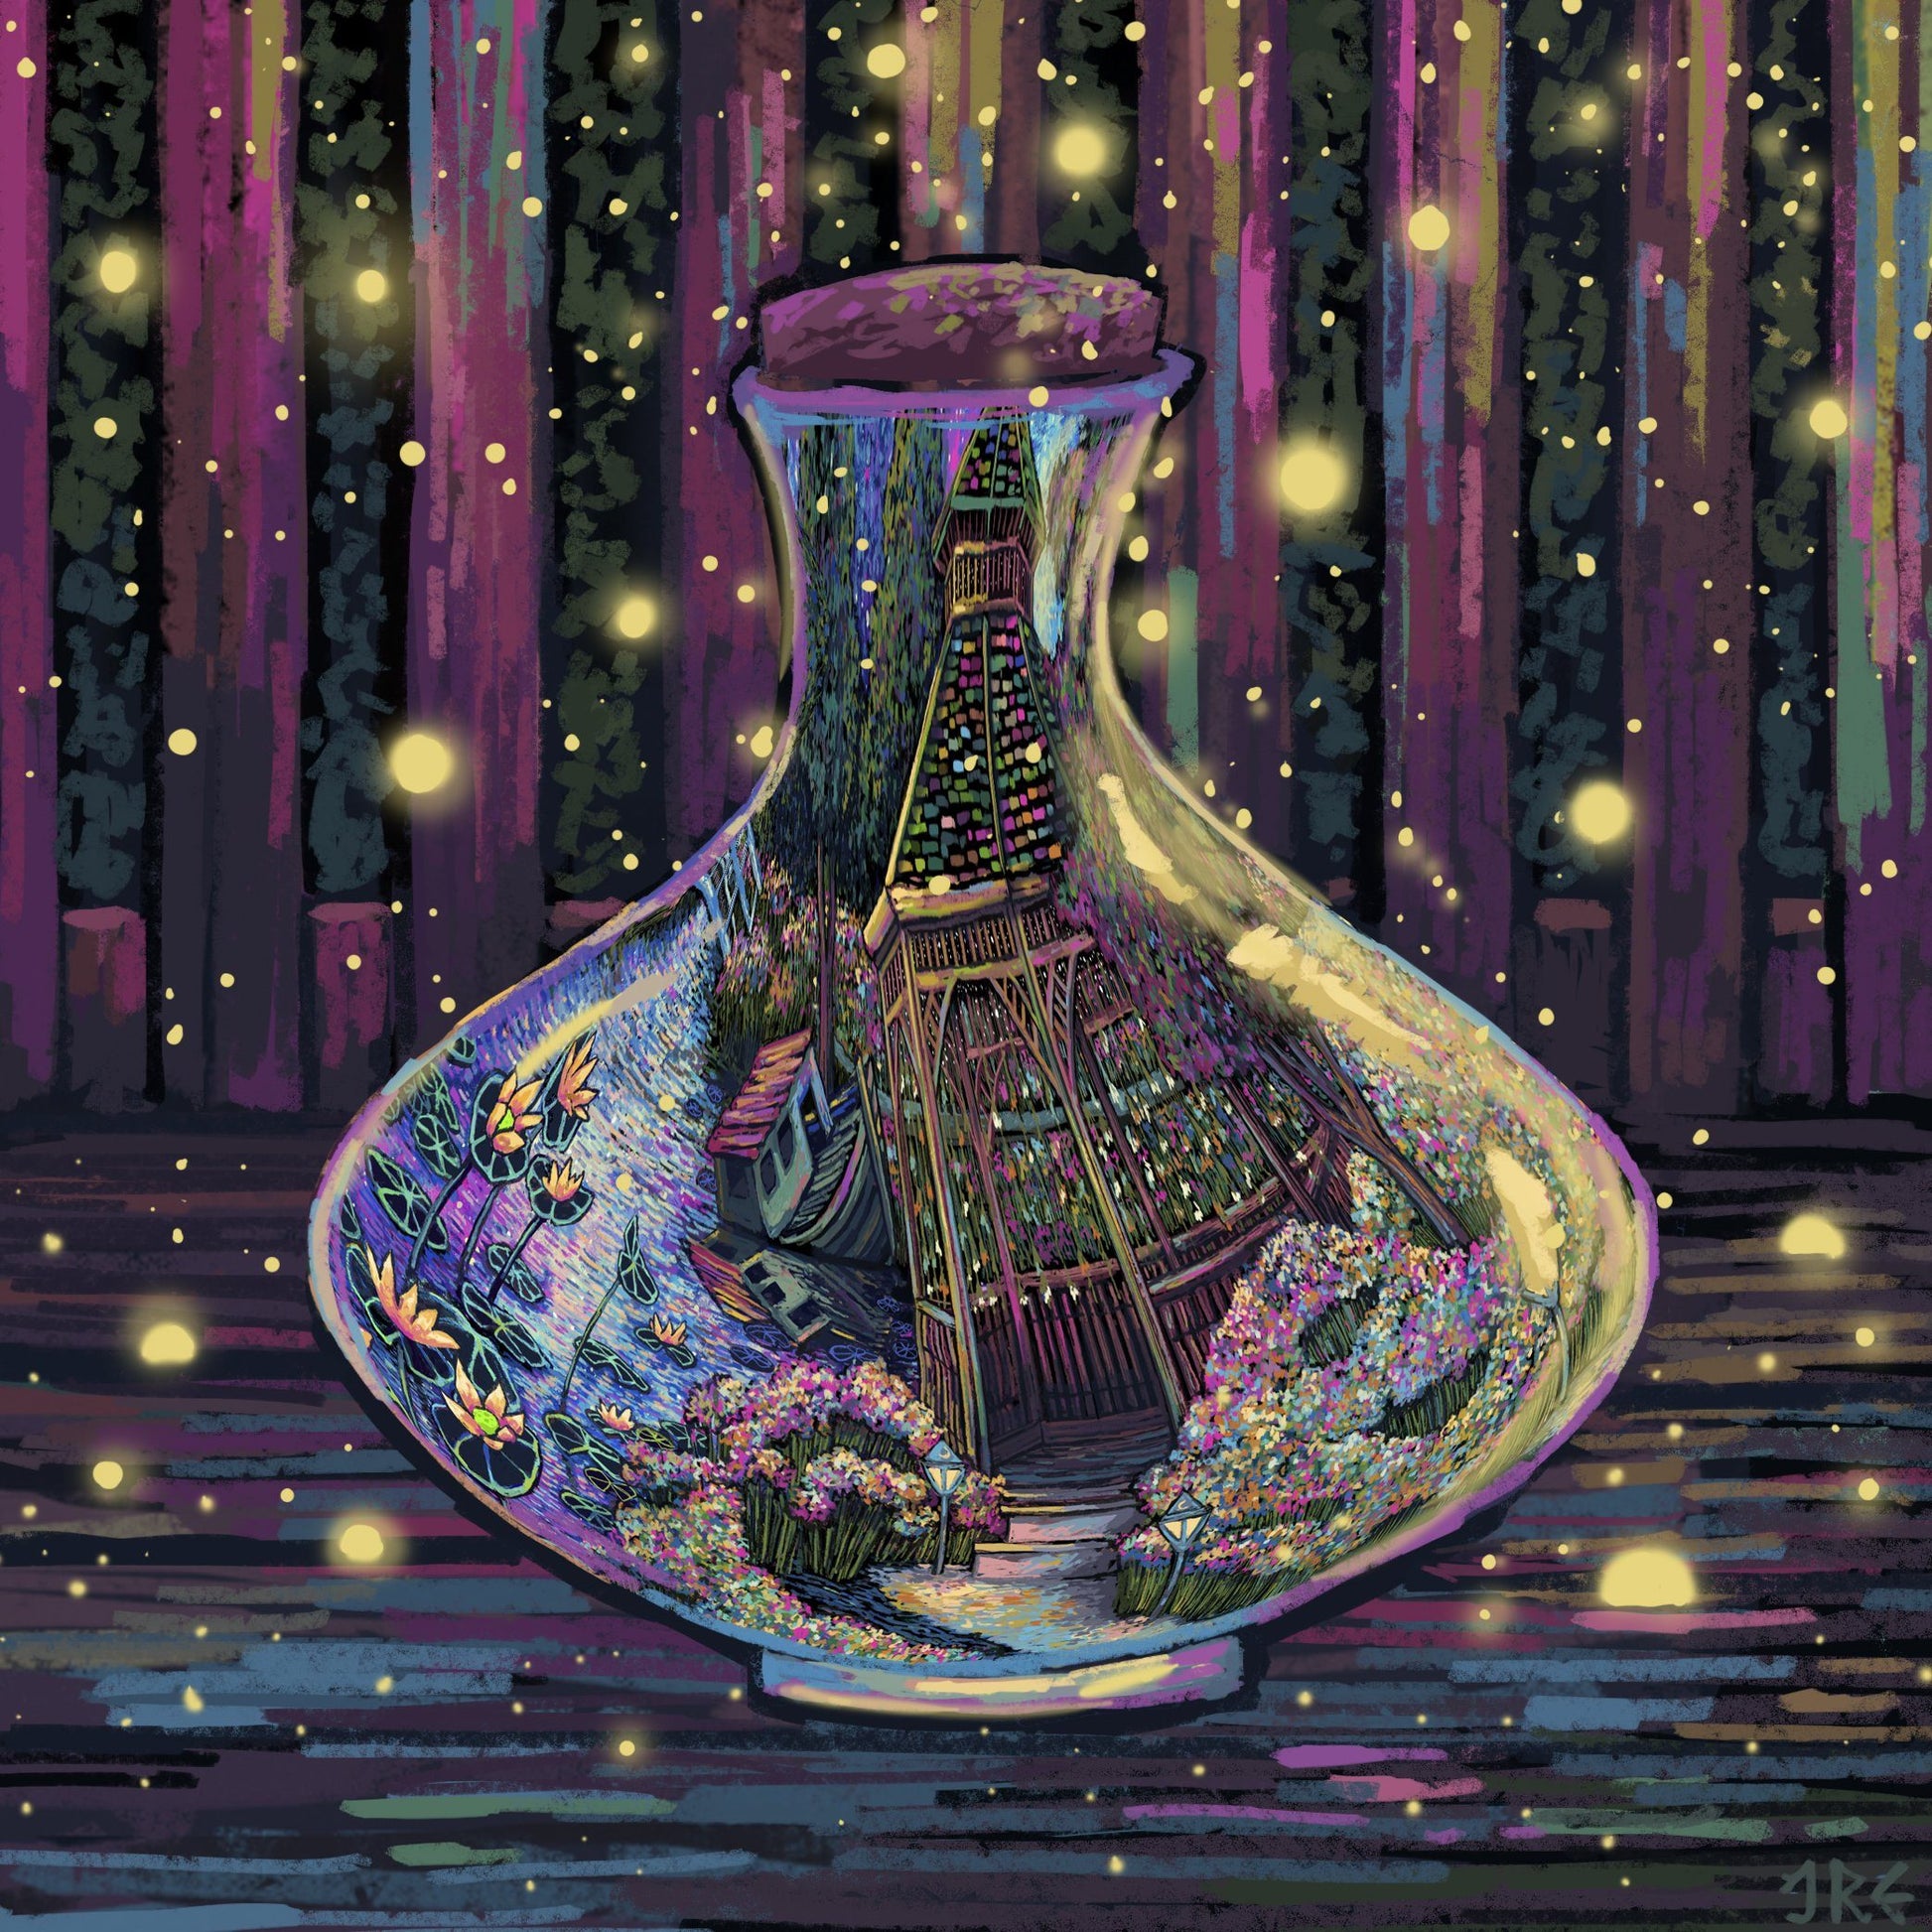 An Hour in a Bottle (Limited Edition of 50) Print James R. Eads